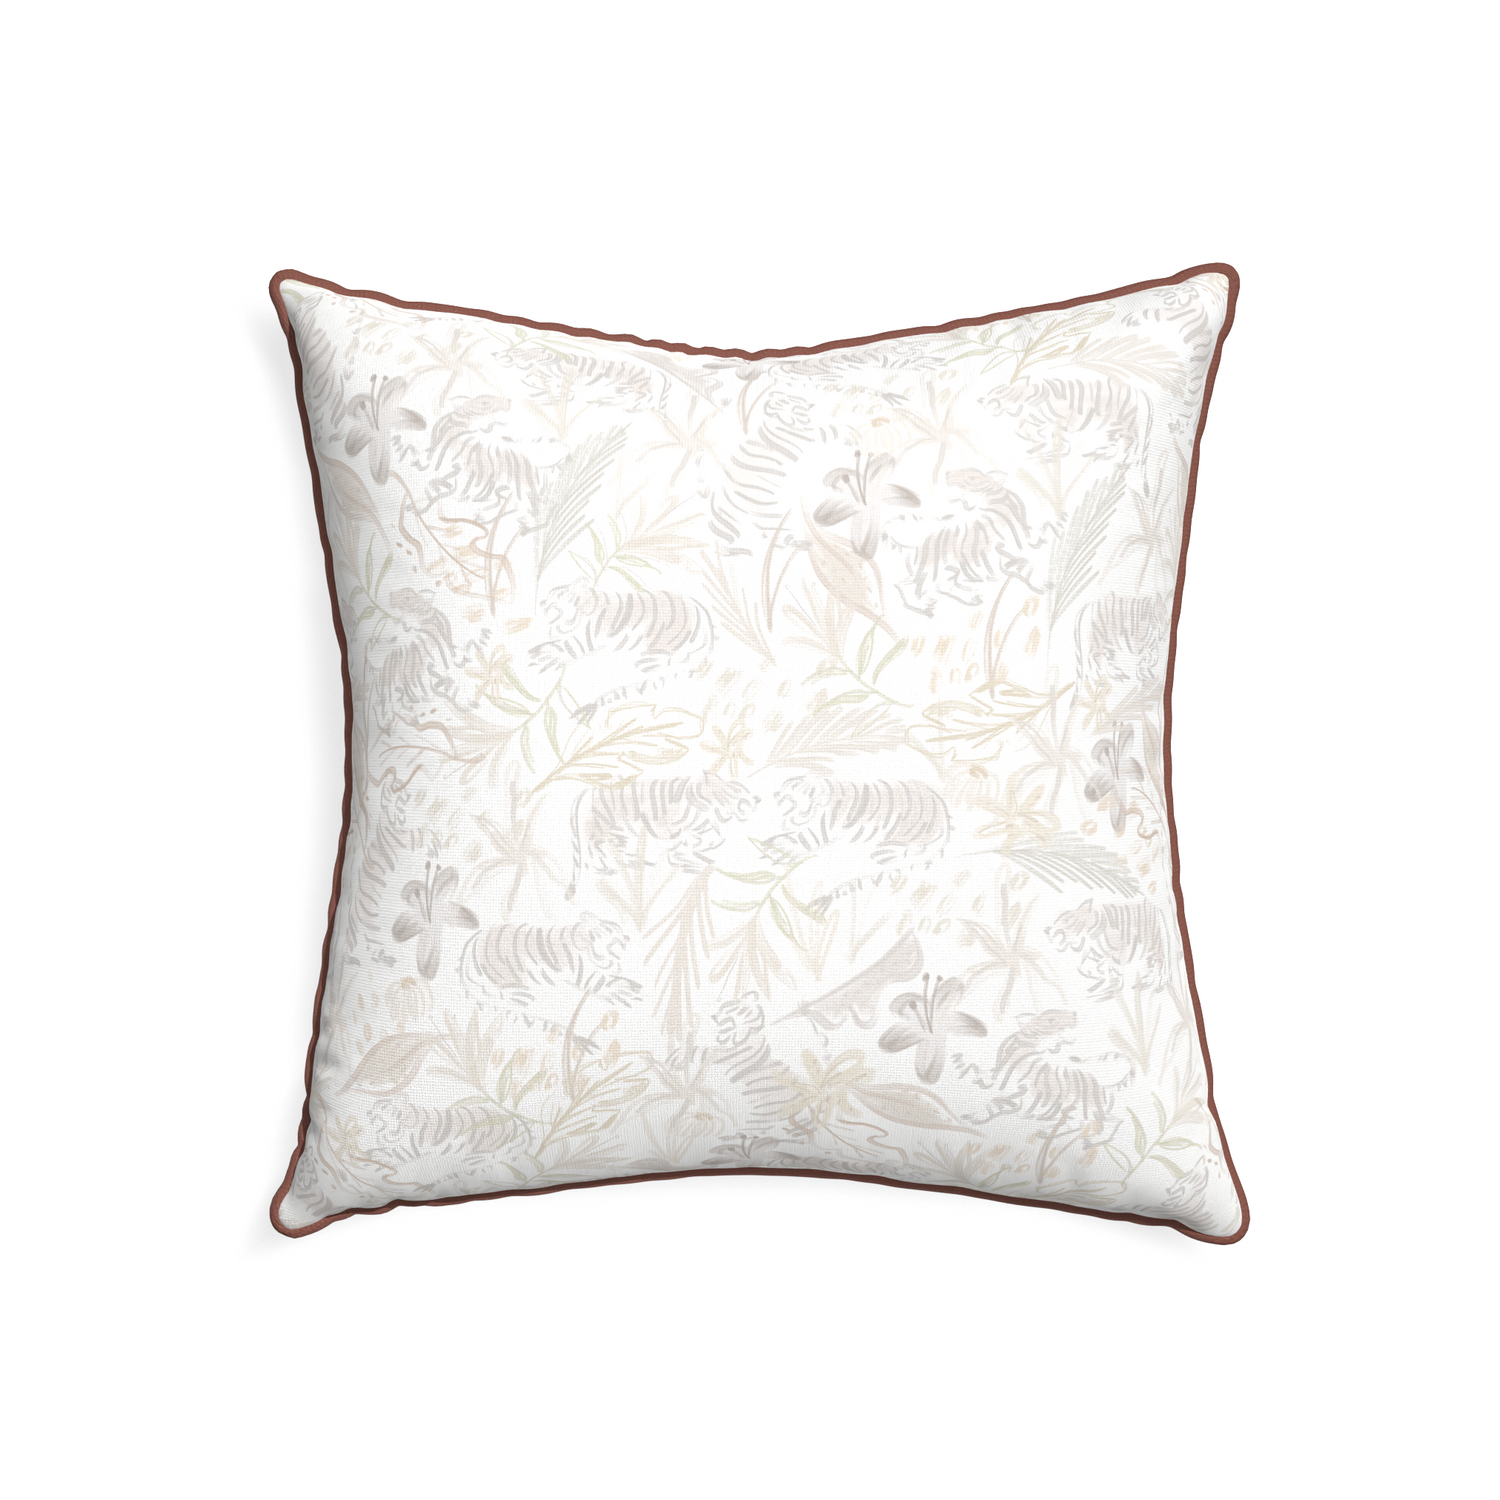 22-square frida sand custom beige chinoiserie tigerpillow with w piping on white background